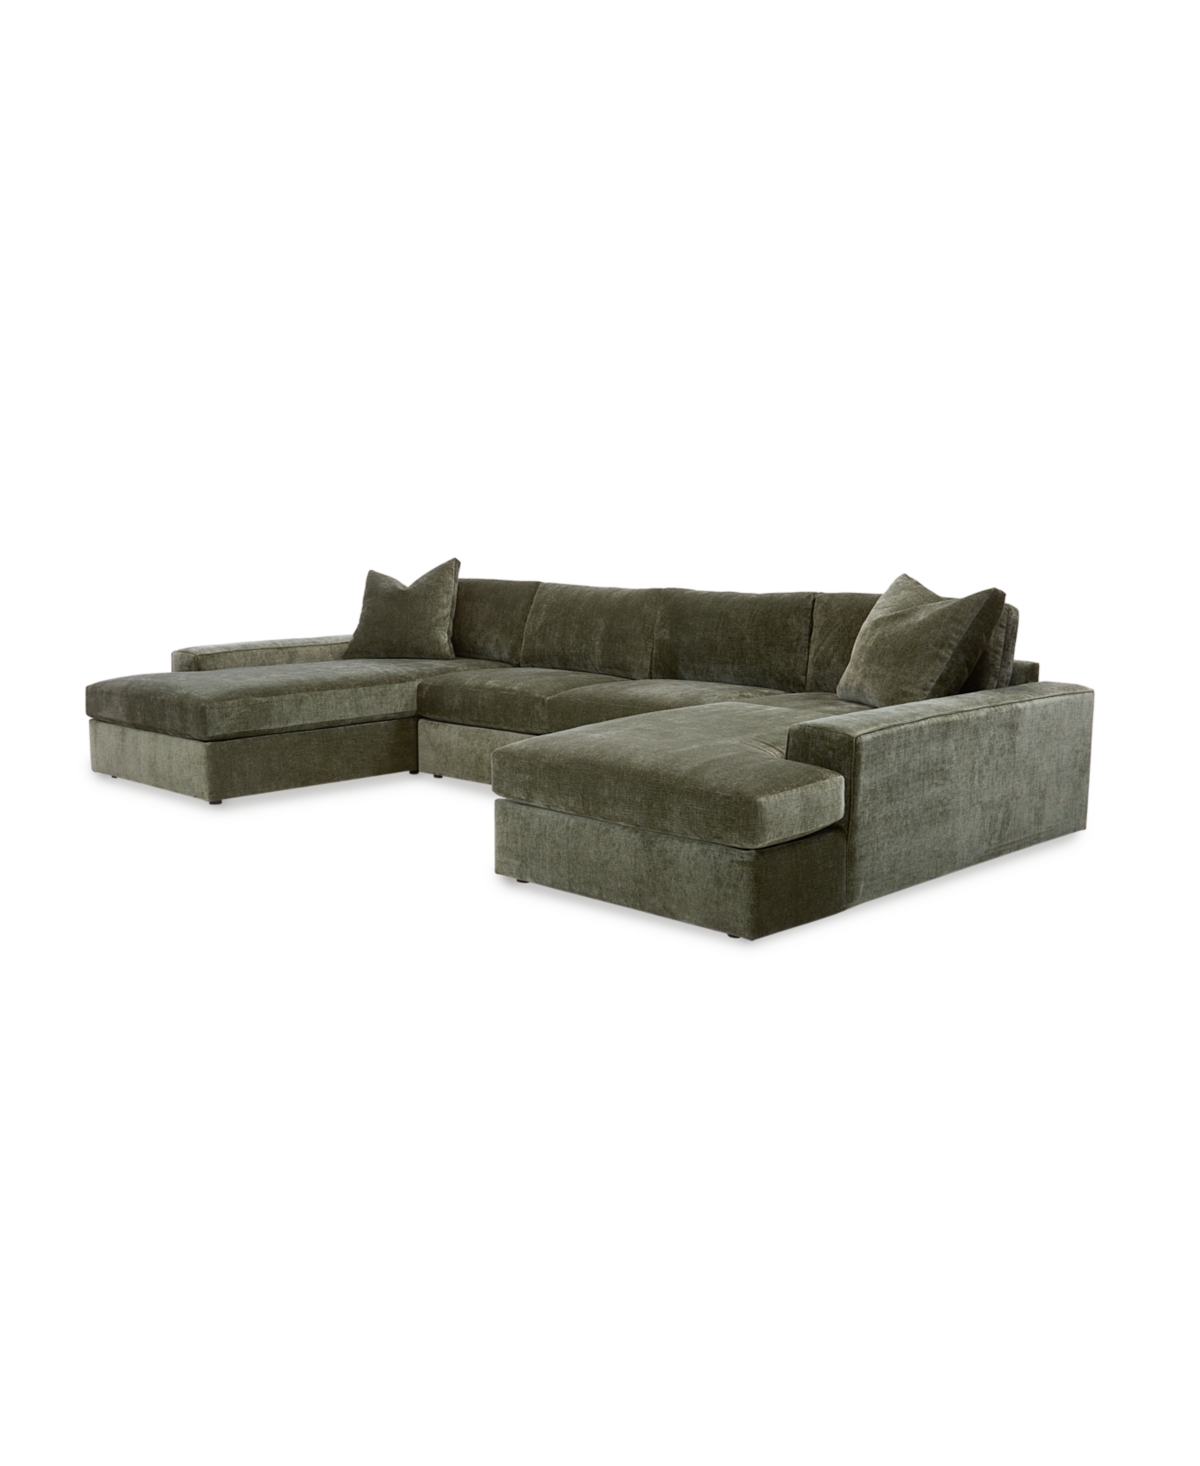 Furniture Michola 161" 3-pc. Fabric Sectional With Double Chaise, Created For Macy's In Zion Forest